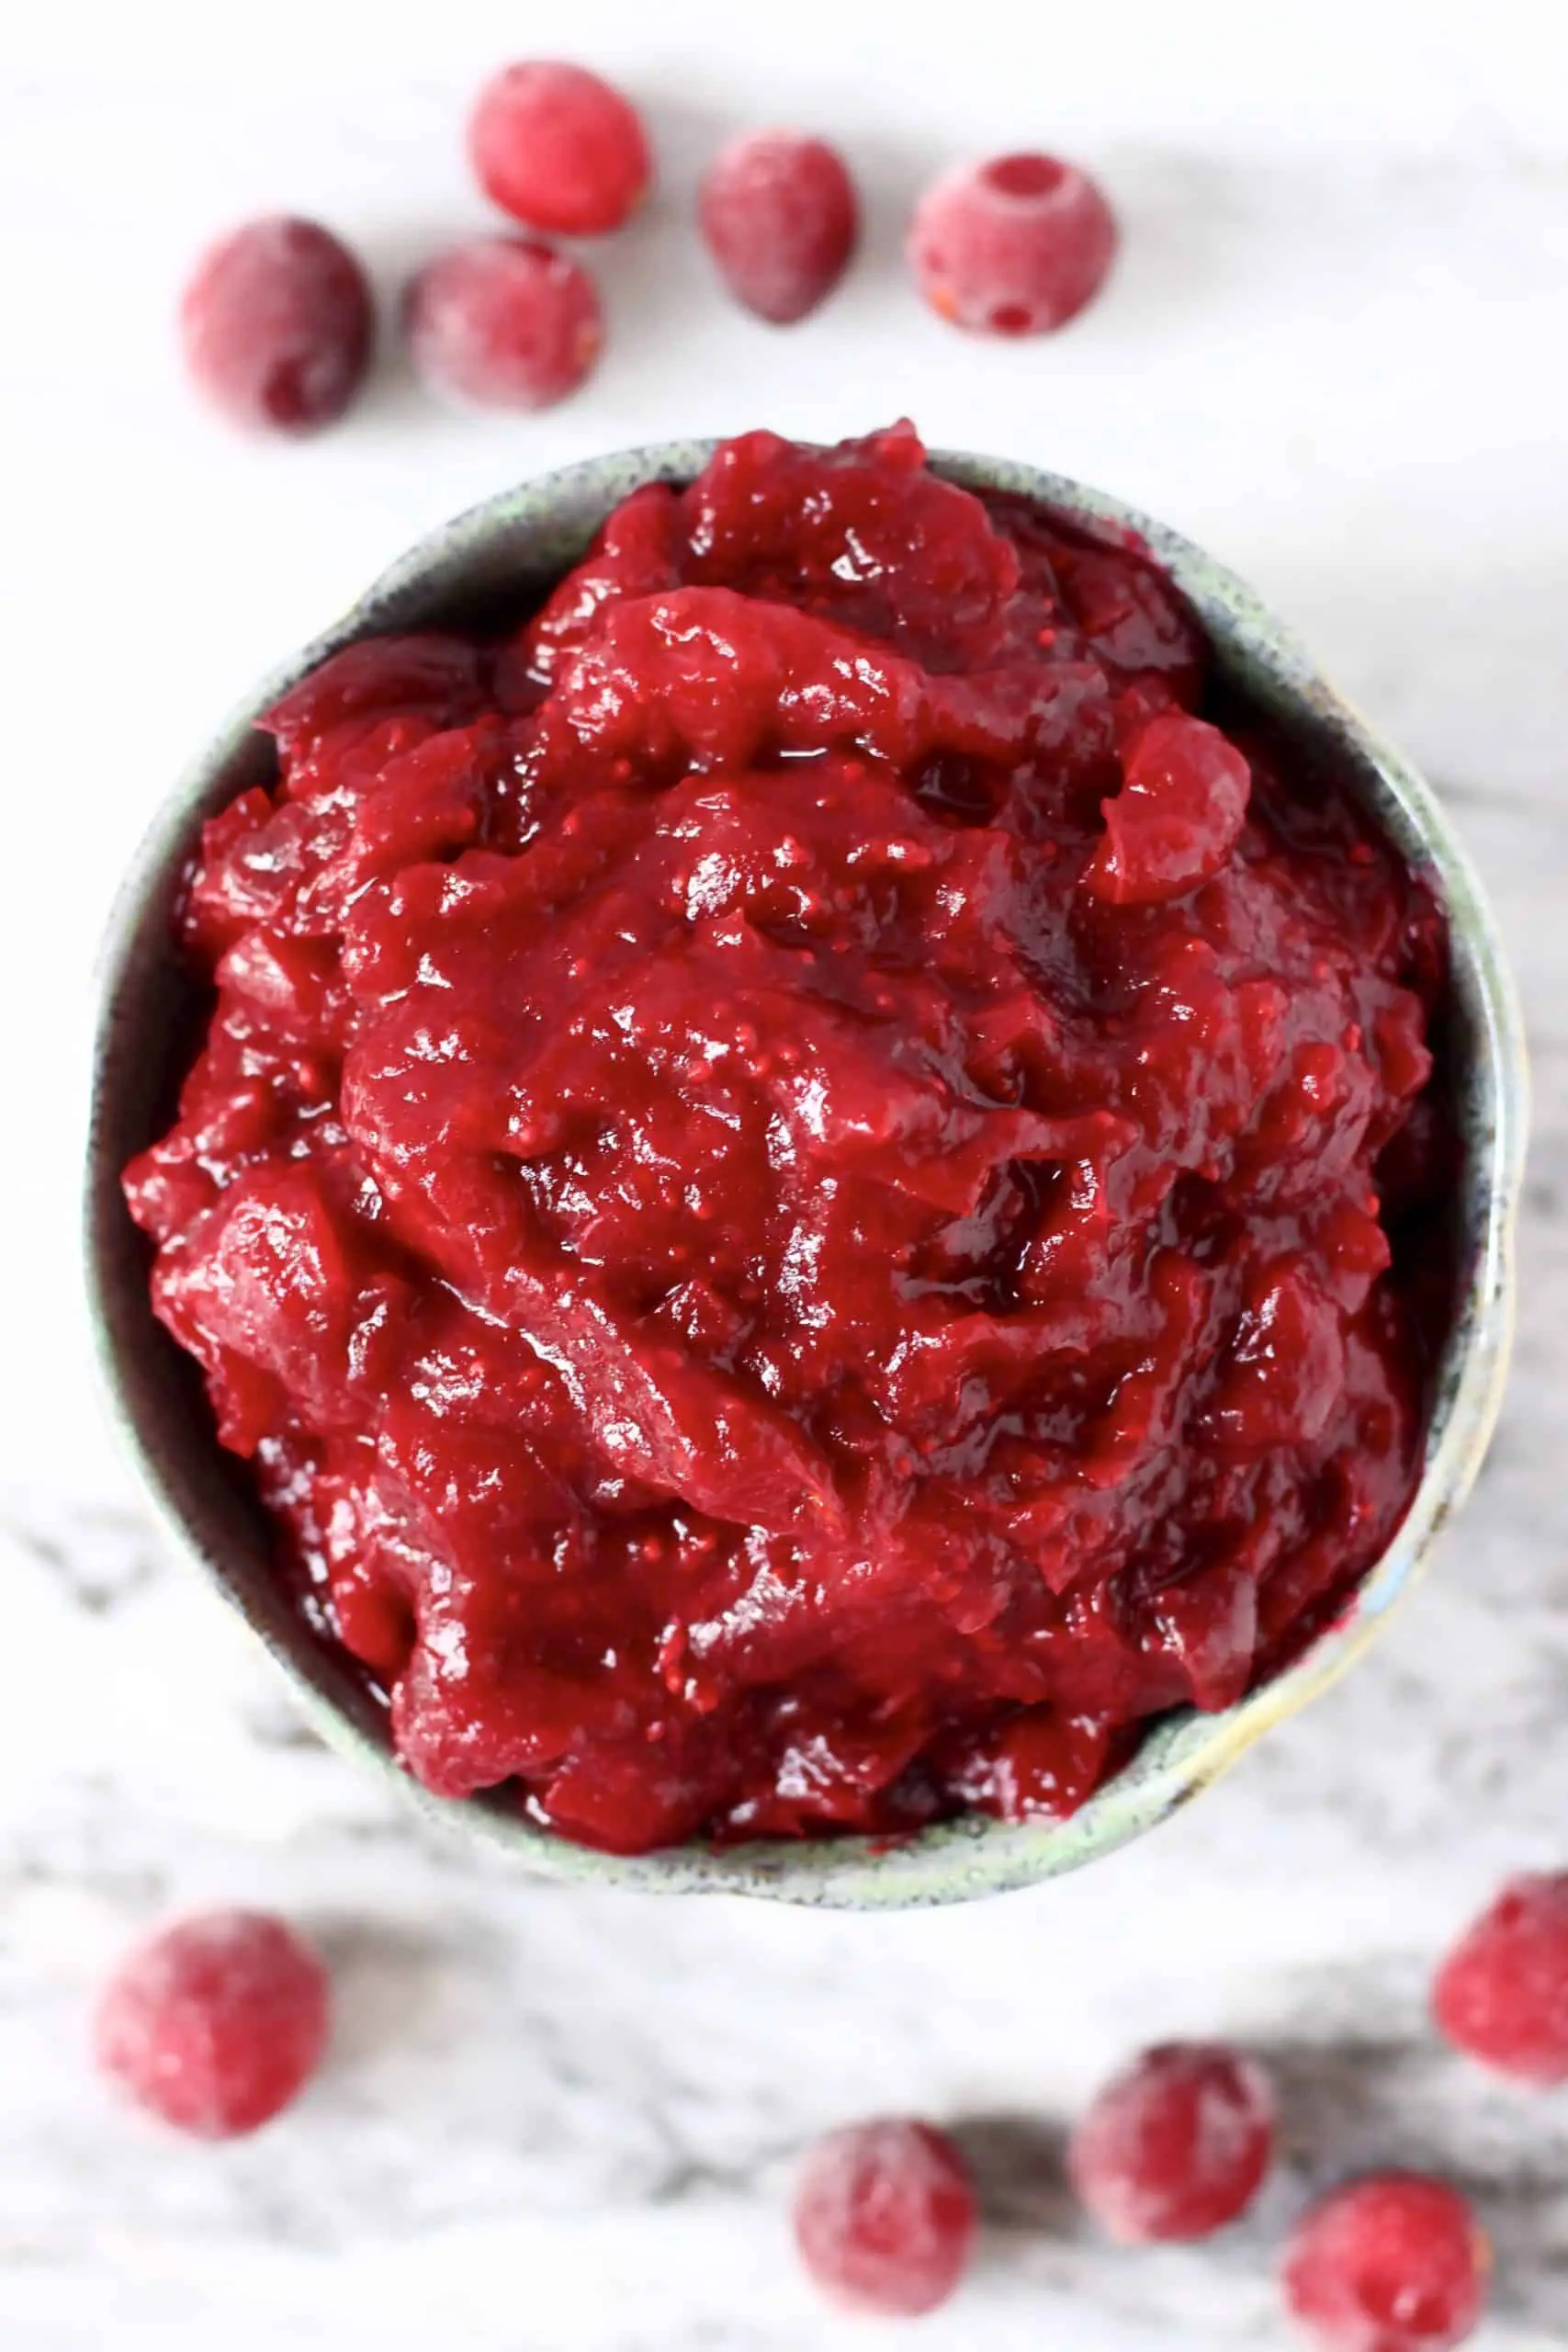 Cranberry sauce in a blue bowl against a marble background with fresh cranberries 